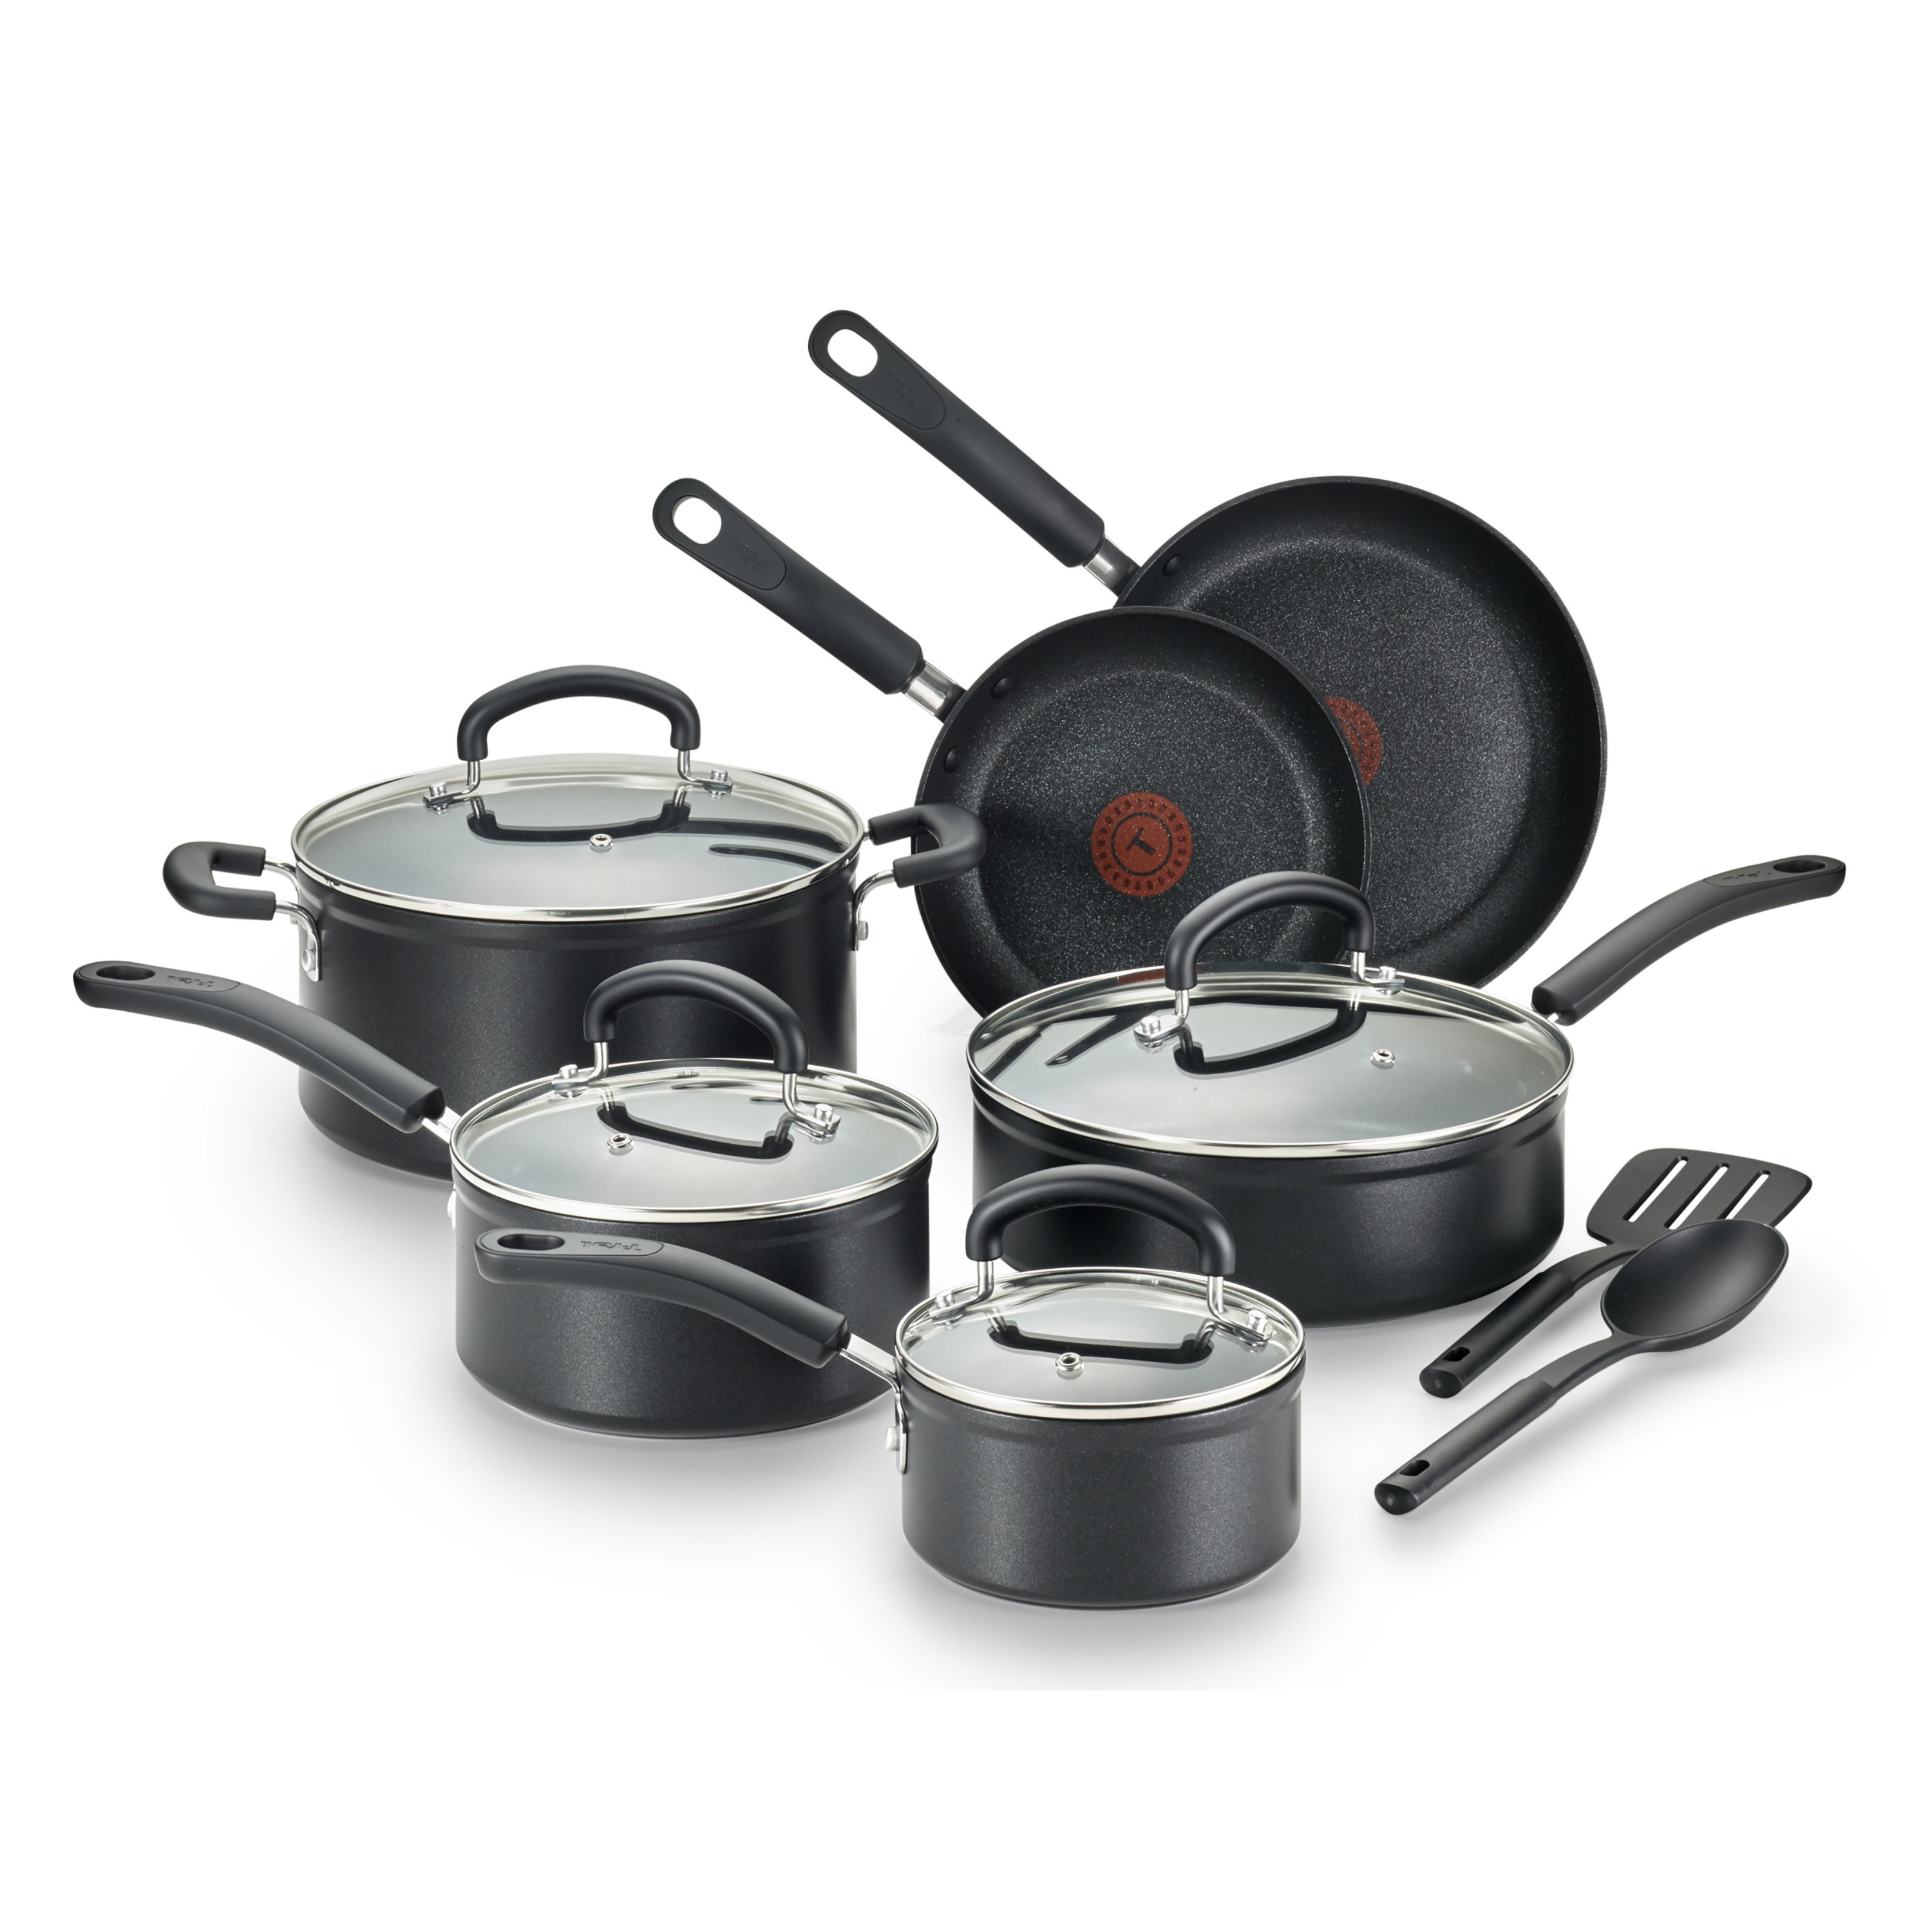  T-fal Ingenio Stainless Steel Cookware Set 4 Piece Induction  Cookware, Pots and Pans, Oven, Broil, Dishwasher Safe Silver: Home & Kitchen